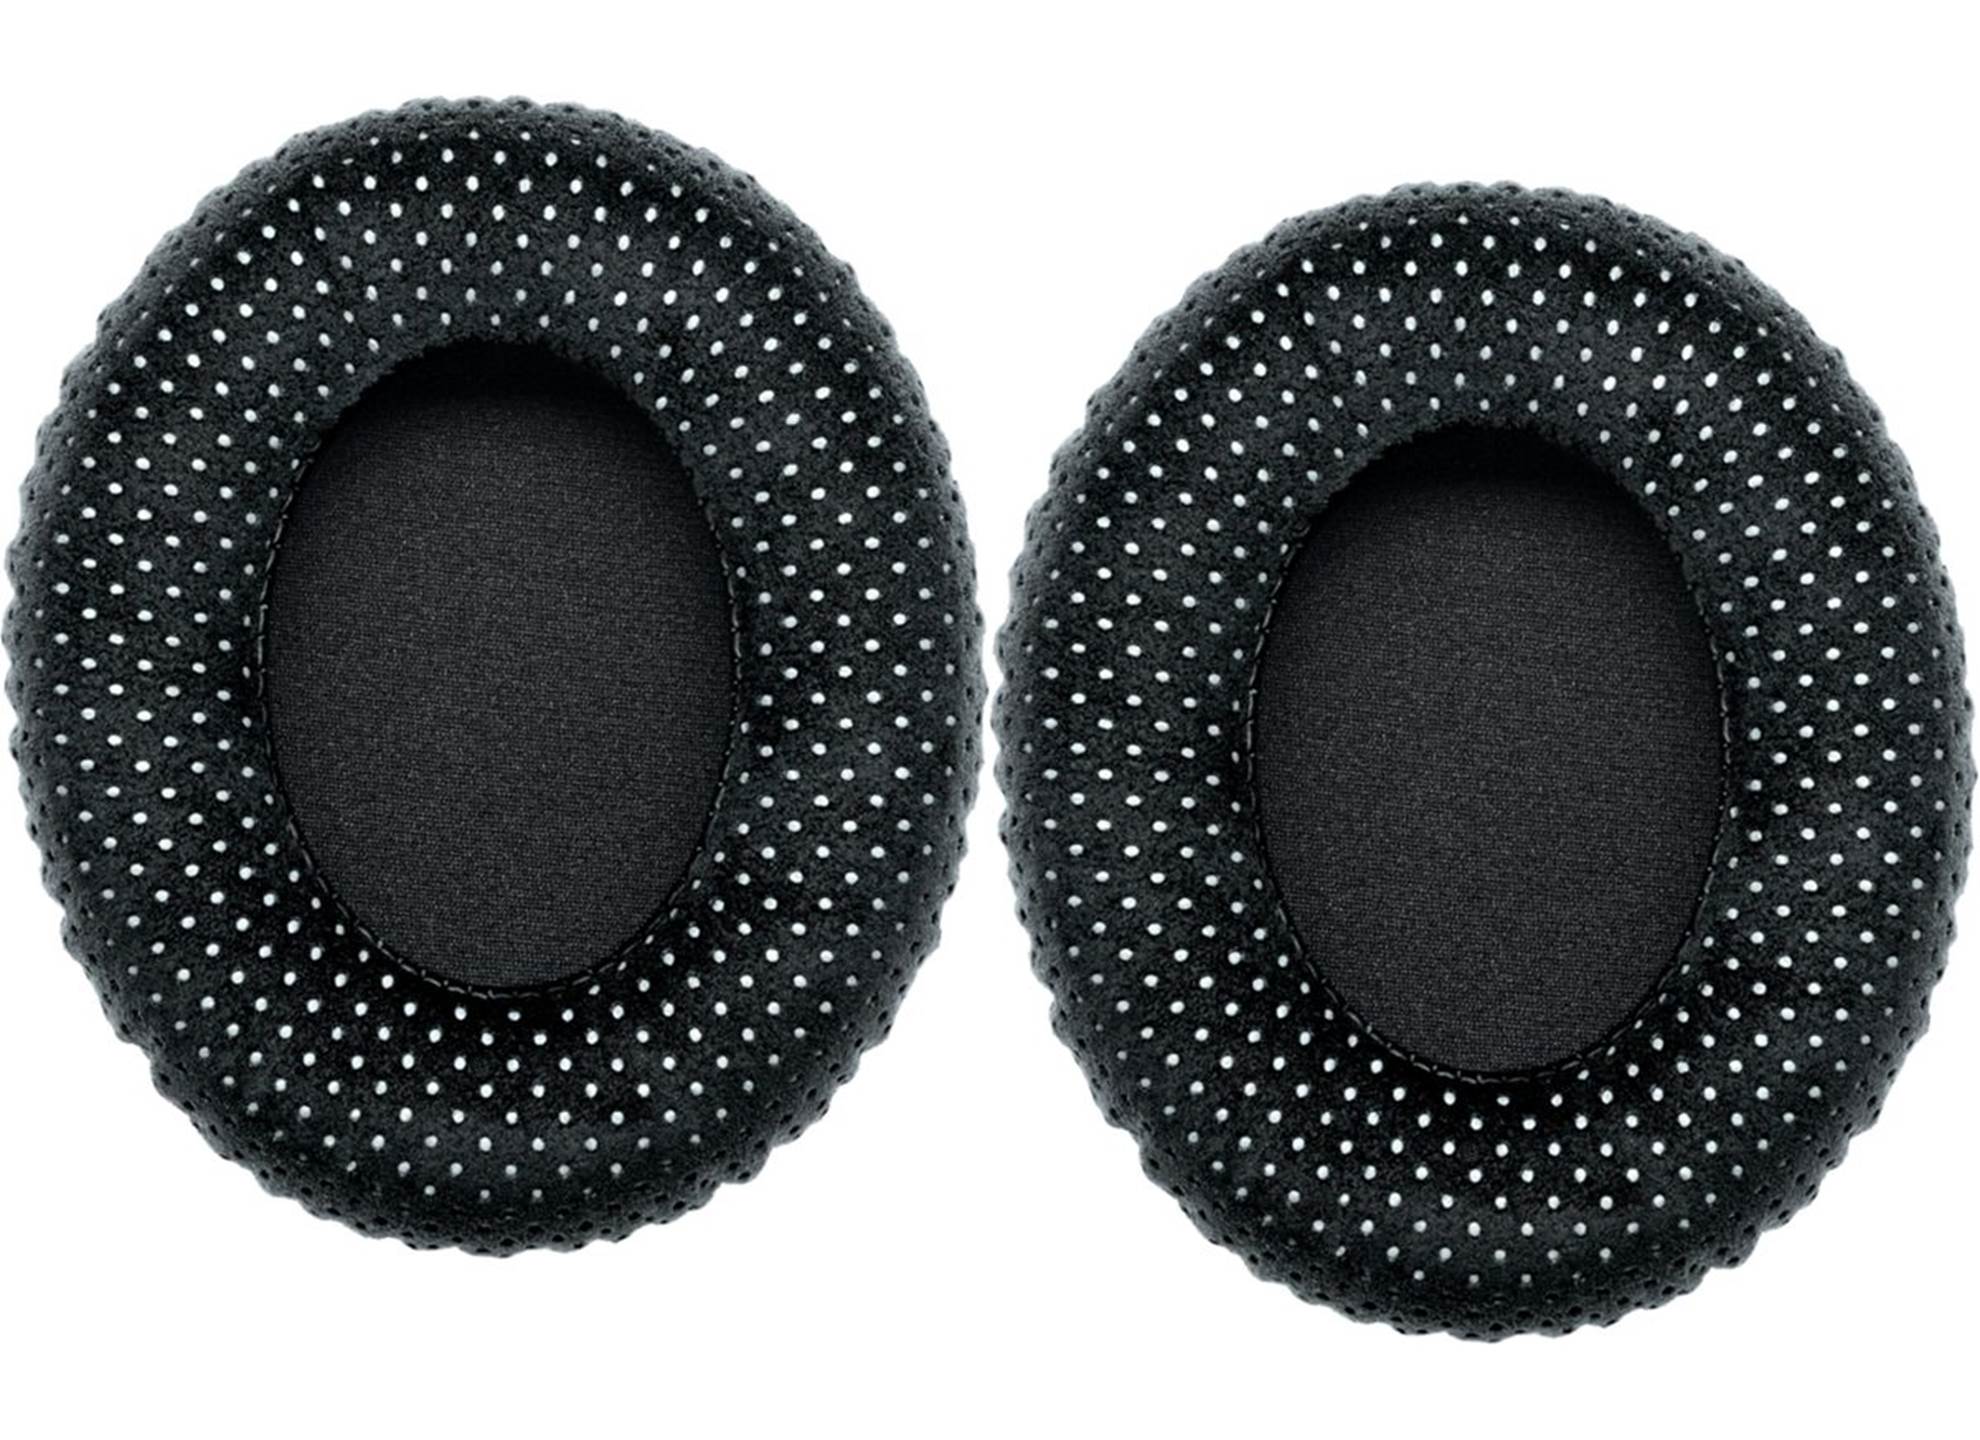 HPAEC1540 Replacement Ear Cushions SRH1540